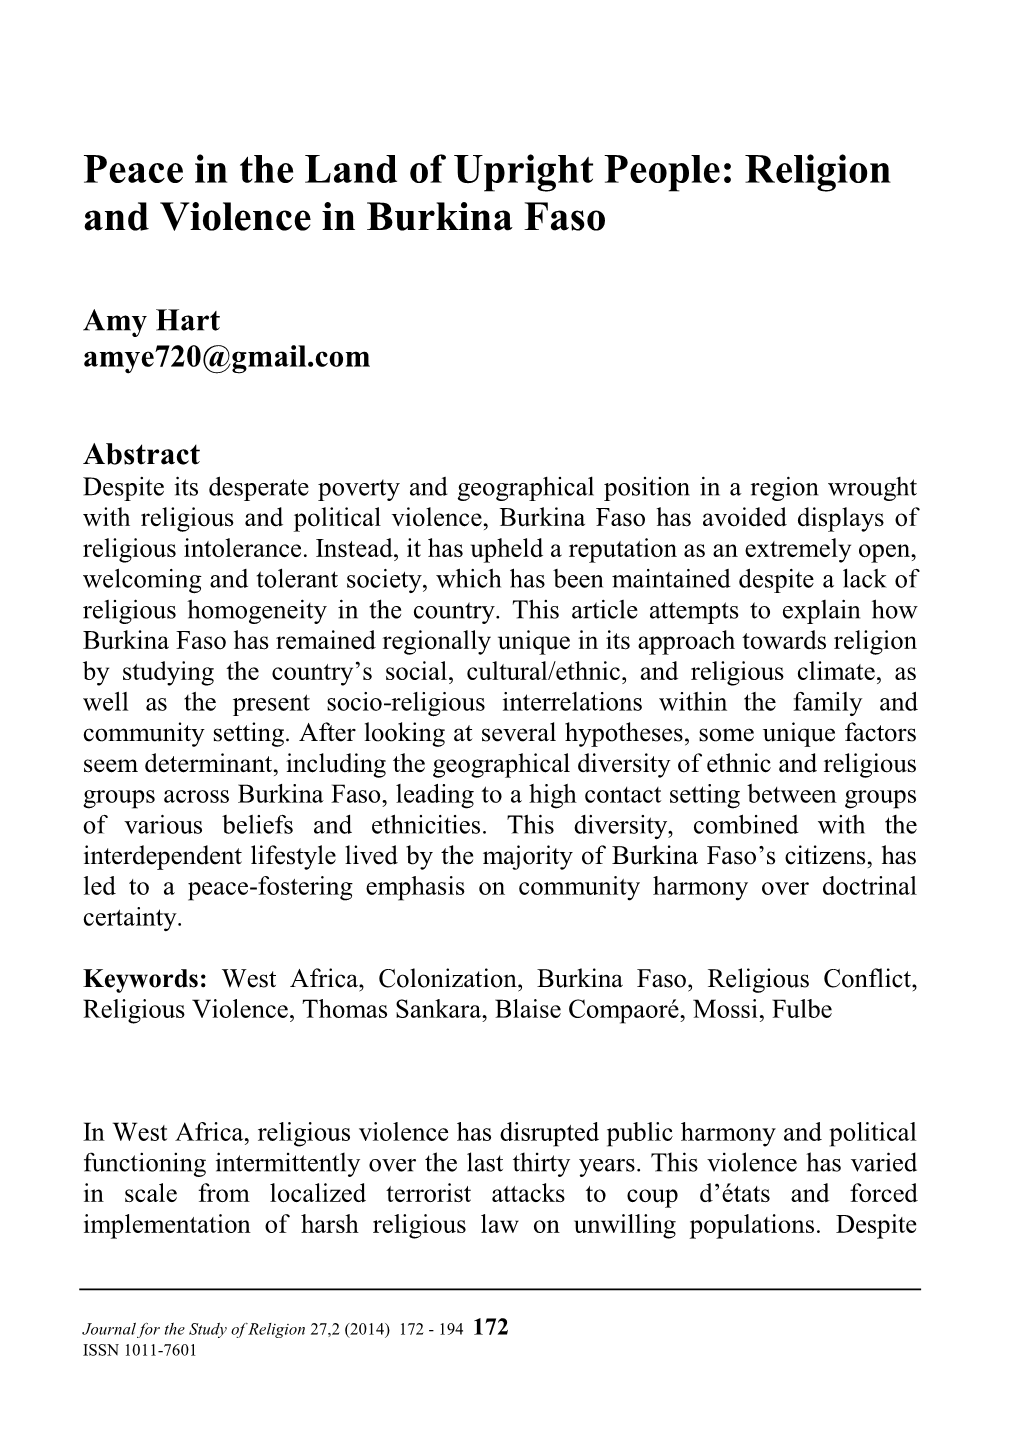 Peace in the Land of Upright People: Religion and Violence in Burkina Faso